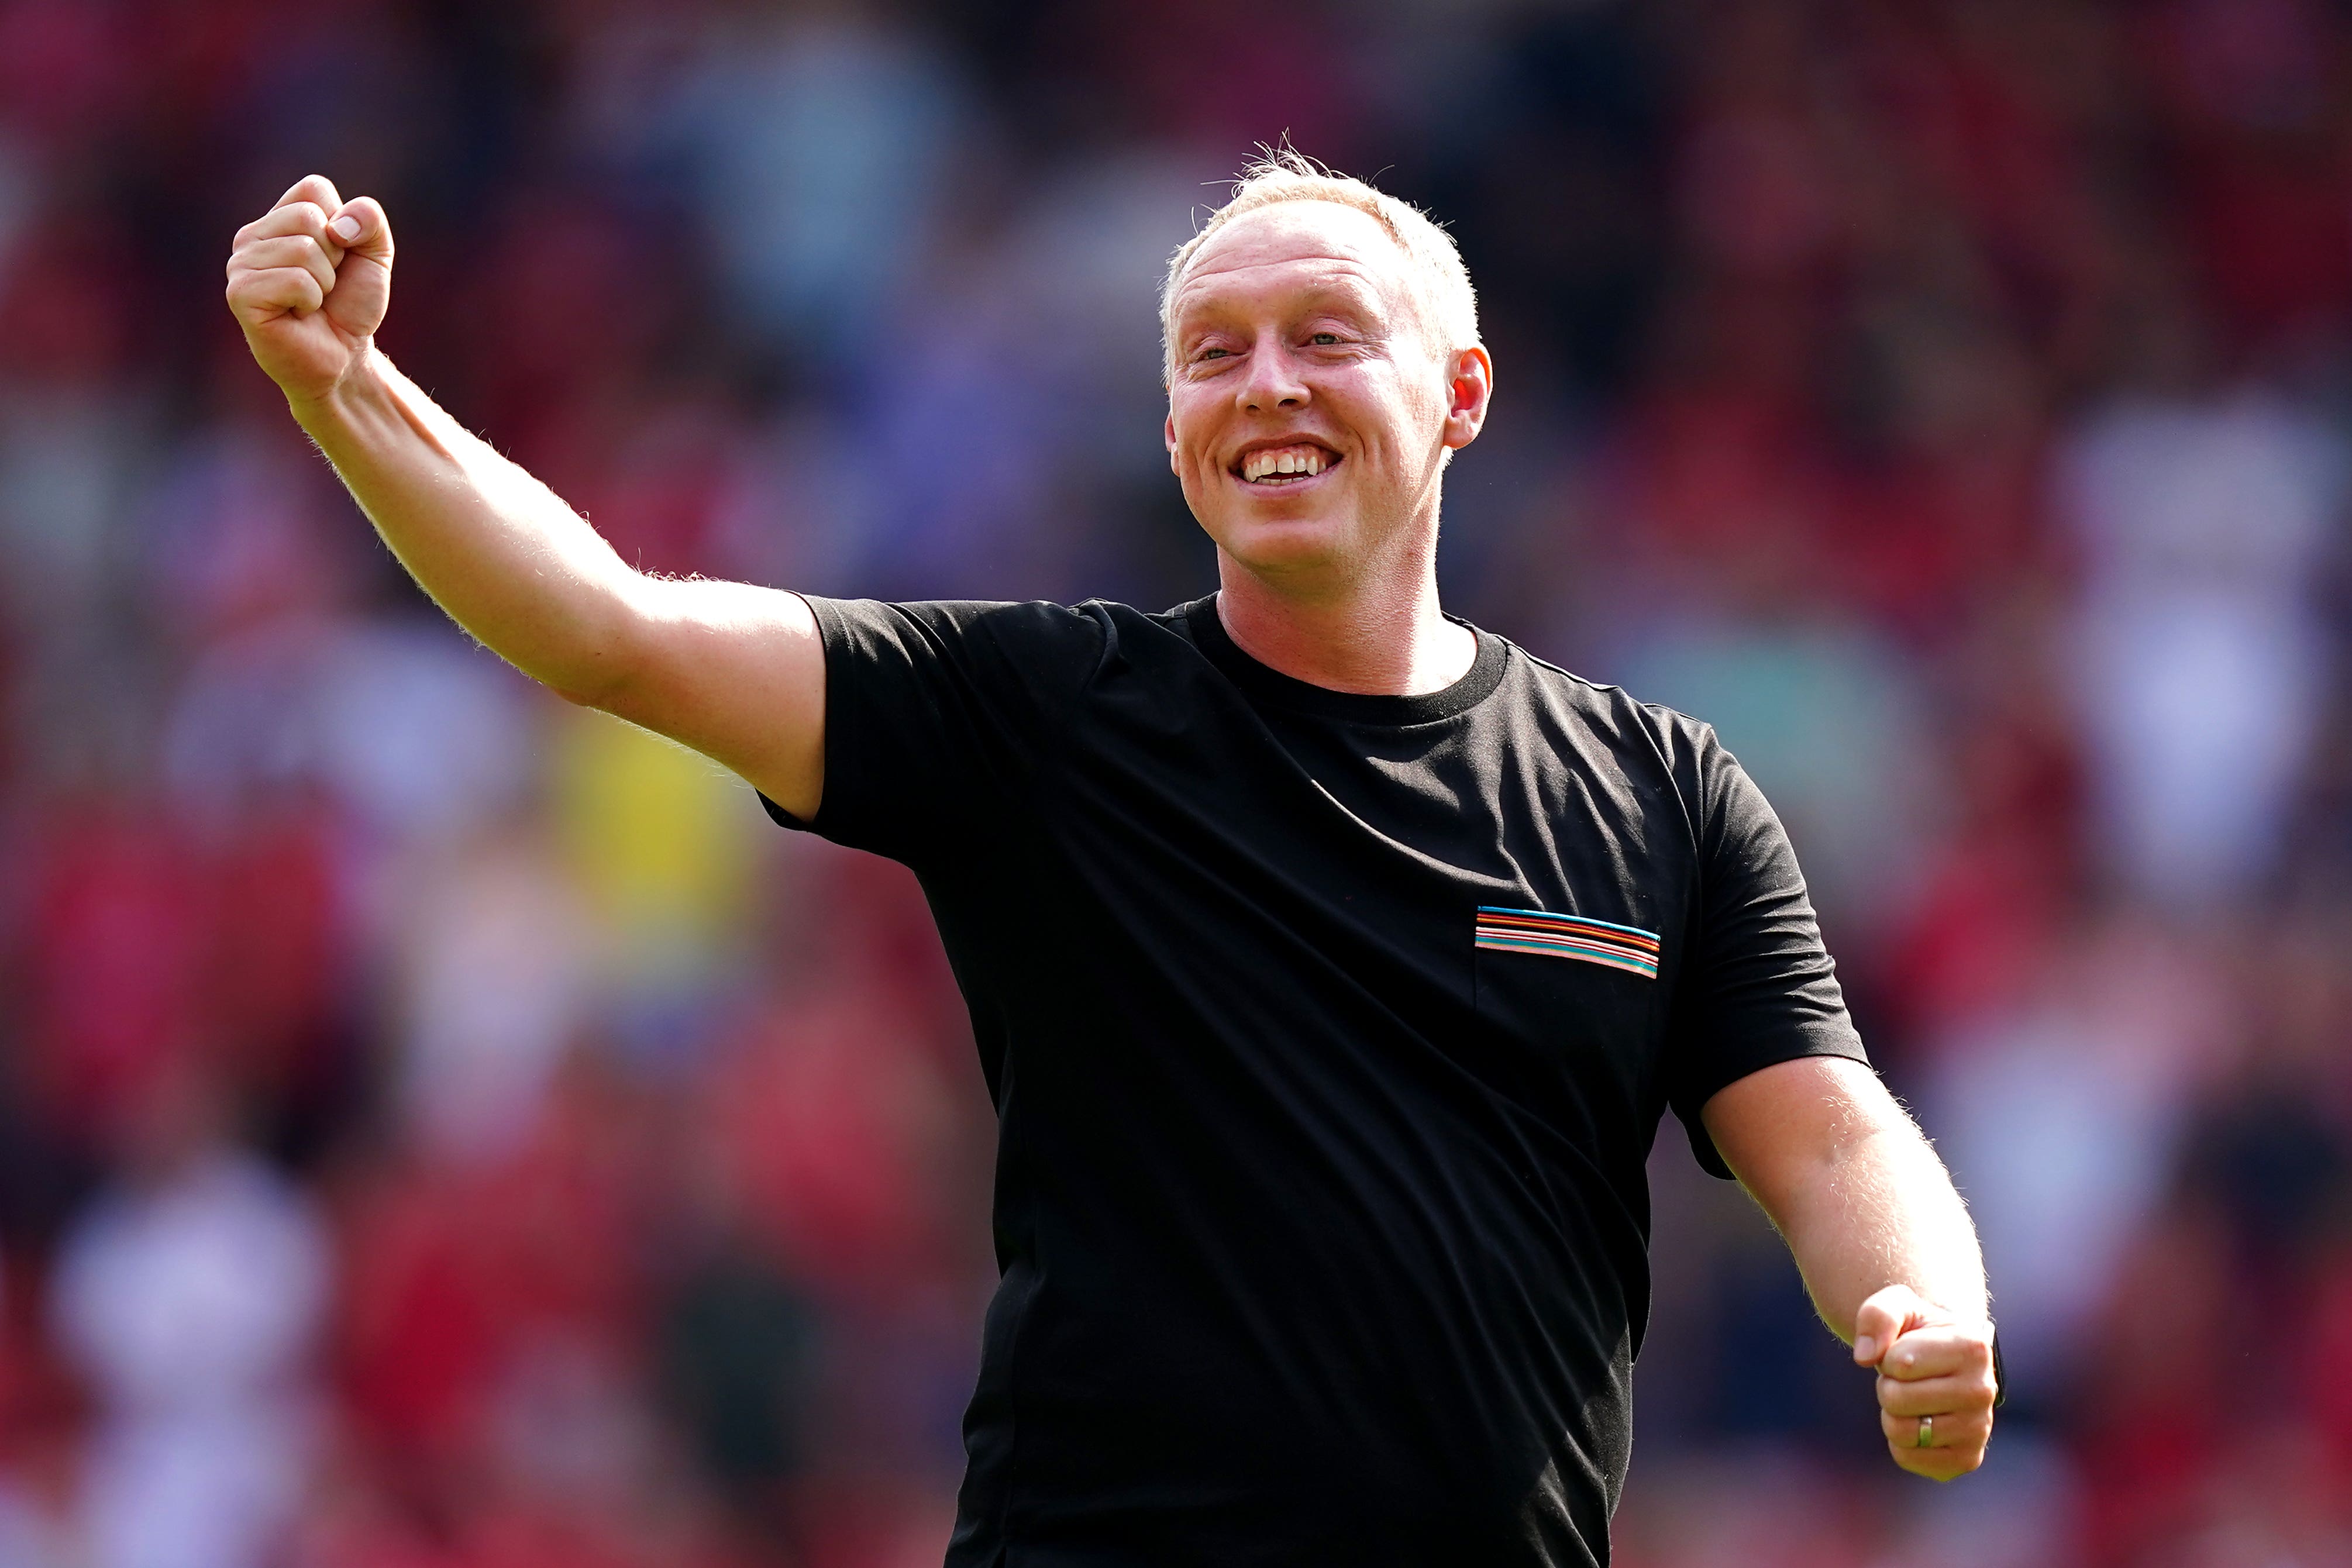 Nottingham Forest manager Steve Cooper has signed a new deal until 2025 (Mike Egerton/PA)